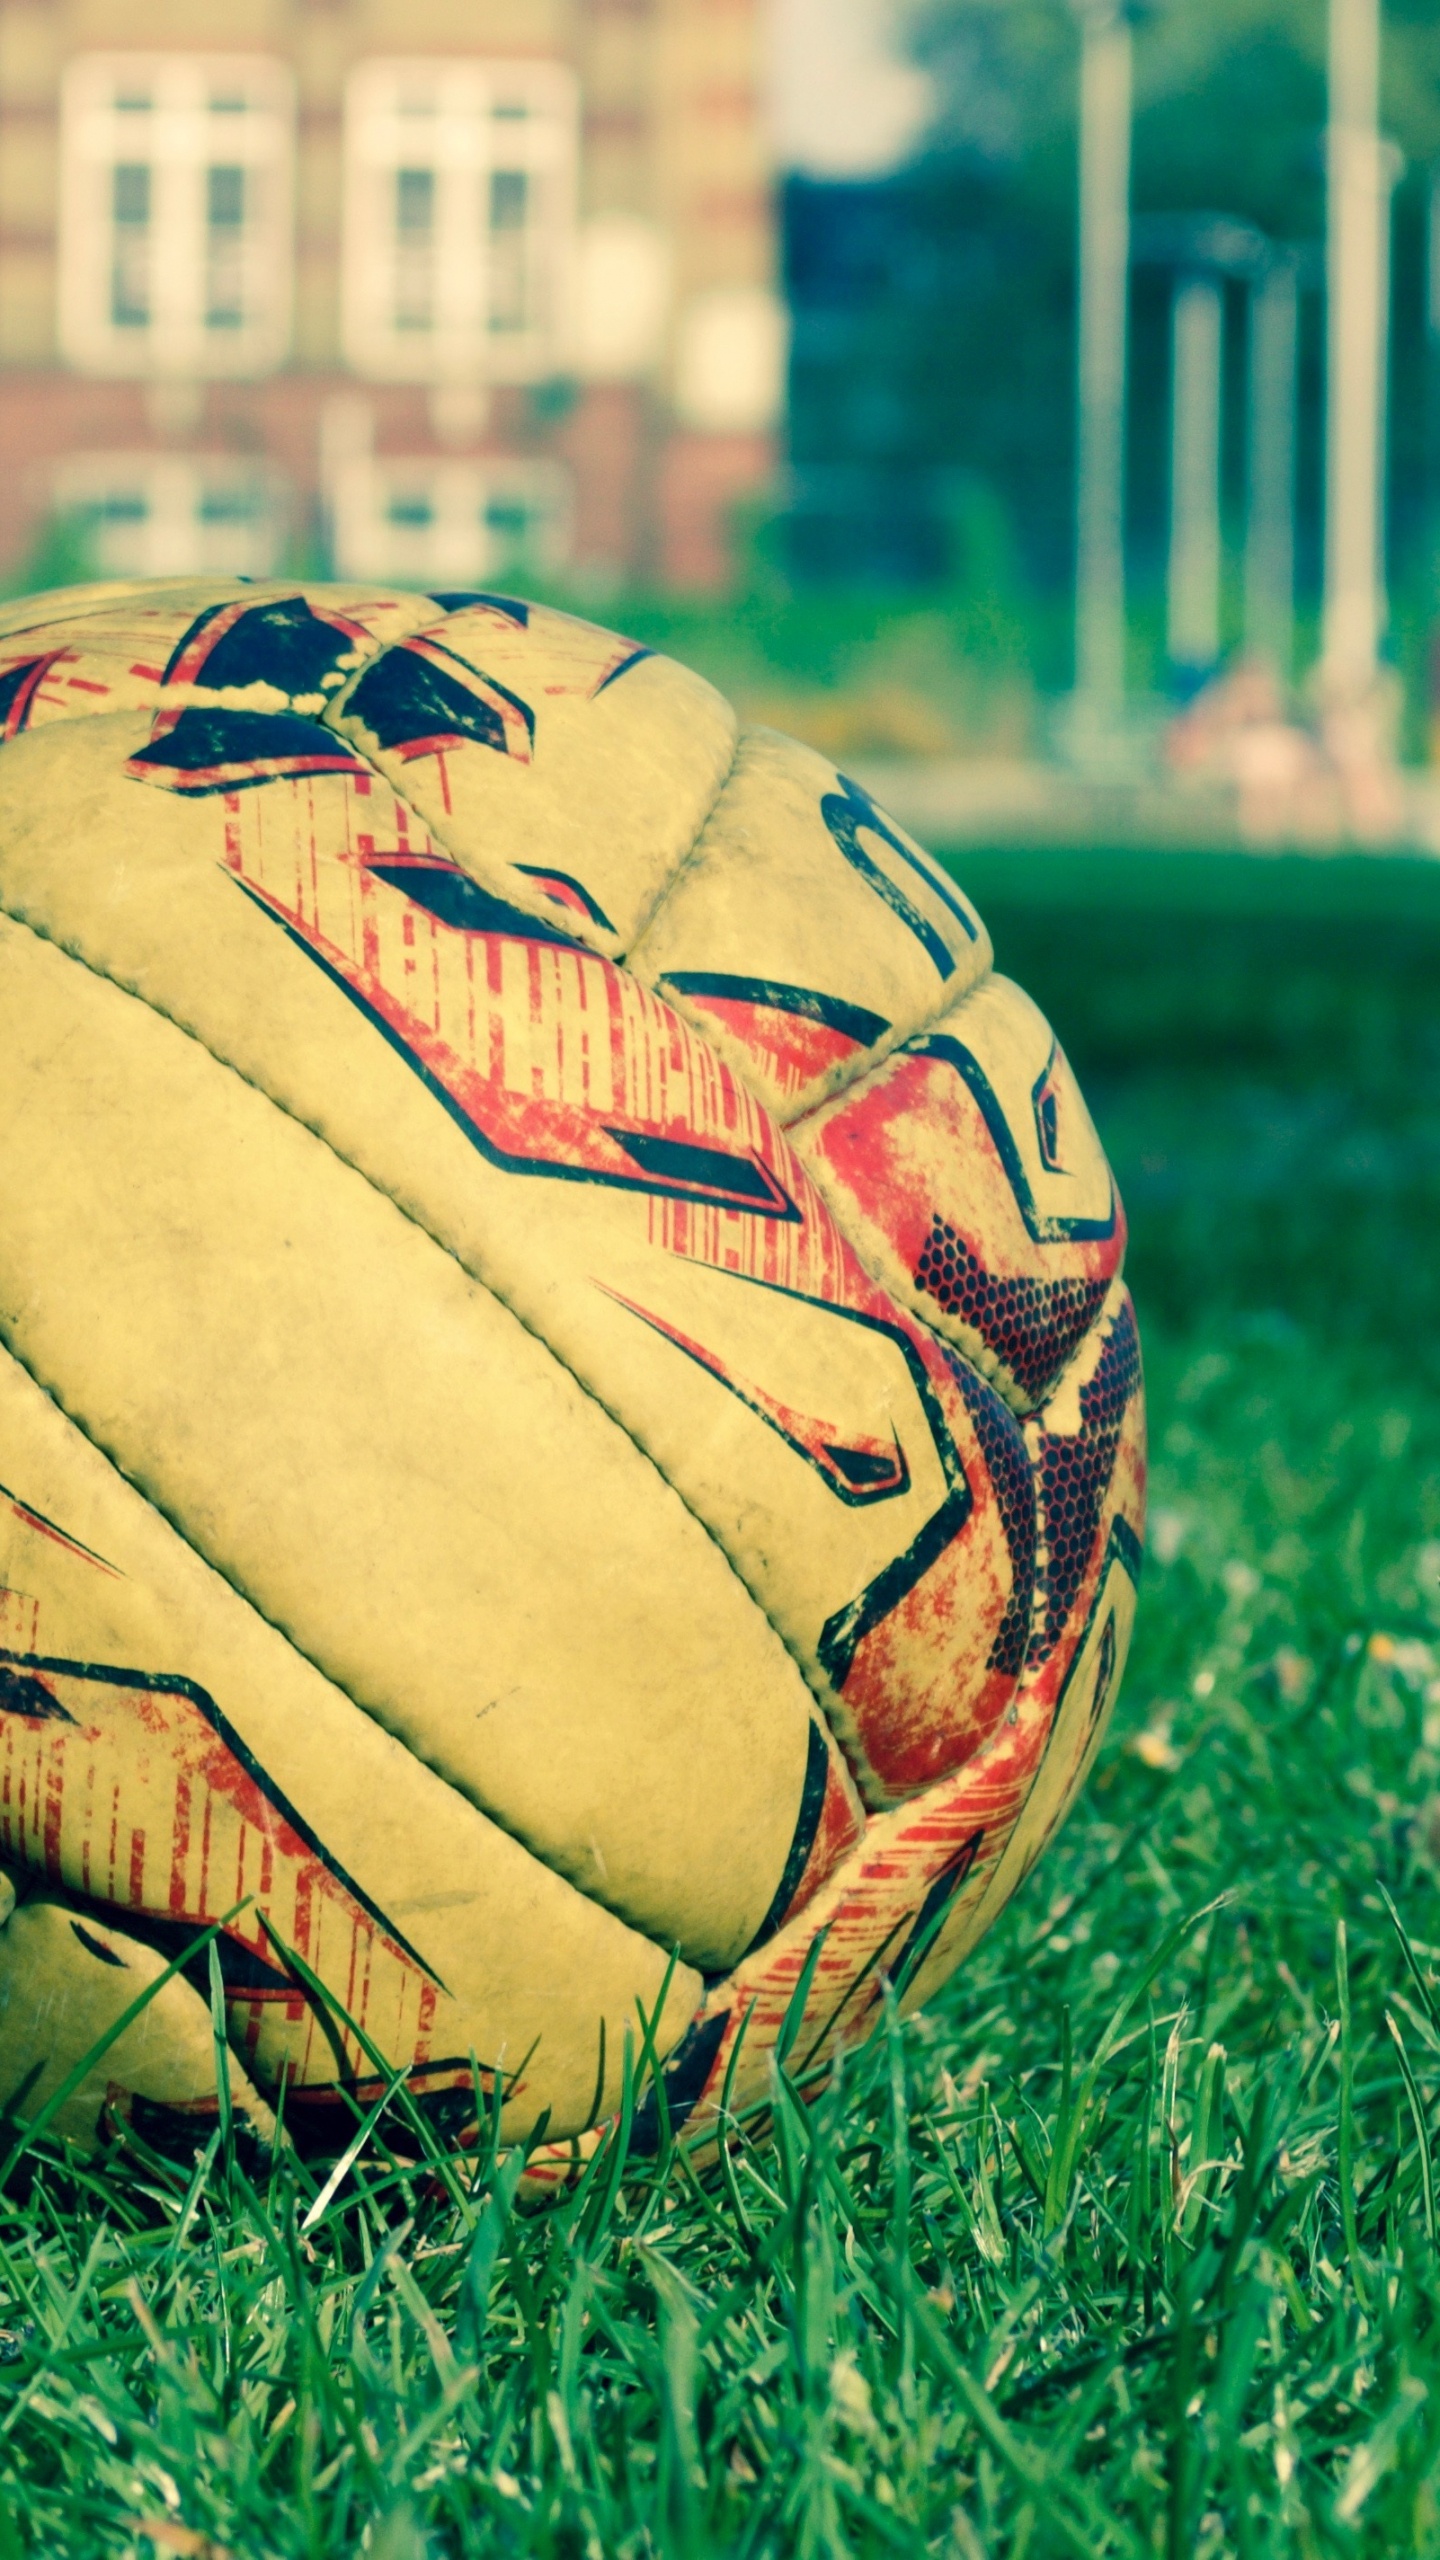 Brown and Black Soccer Ball on Green Grass Field During Daytime. Wallpaper in 1440x2560 Resolution